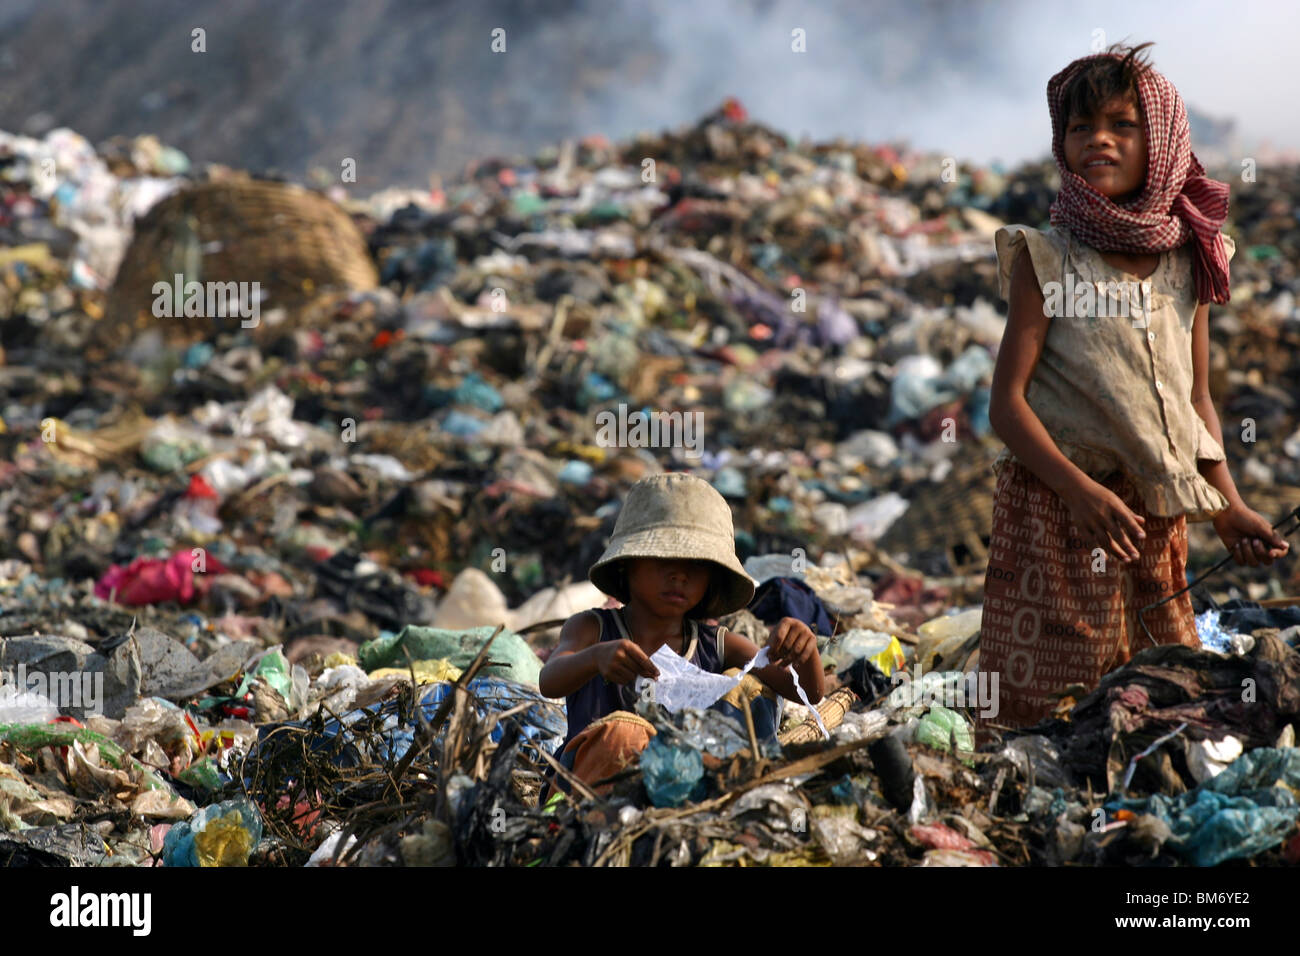 Two young girls scavenging for recyclables the garbage dump in Phnom Penh, Cambodia. Stock Photo